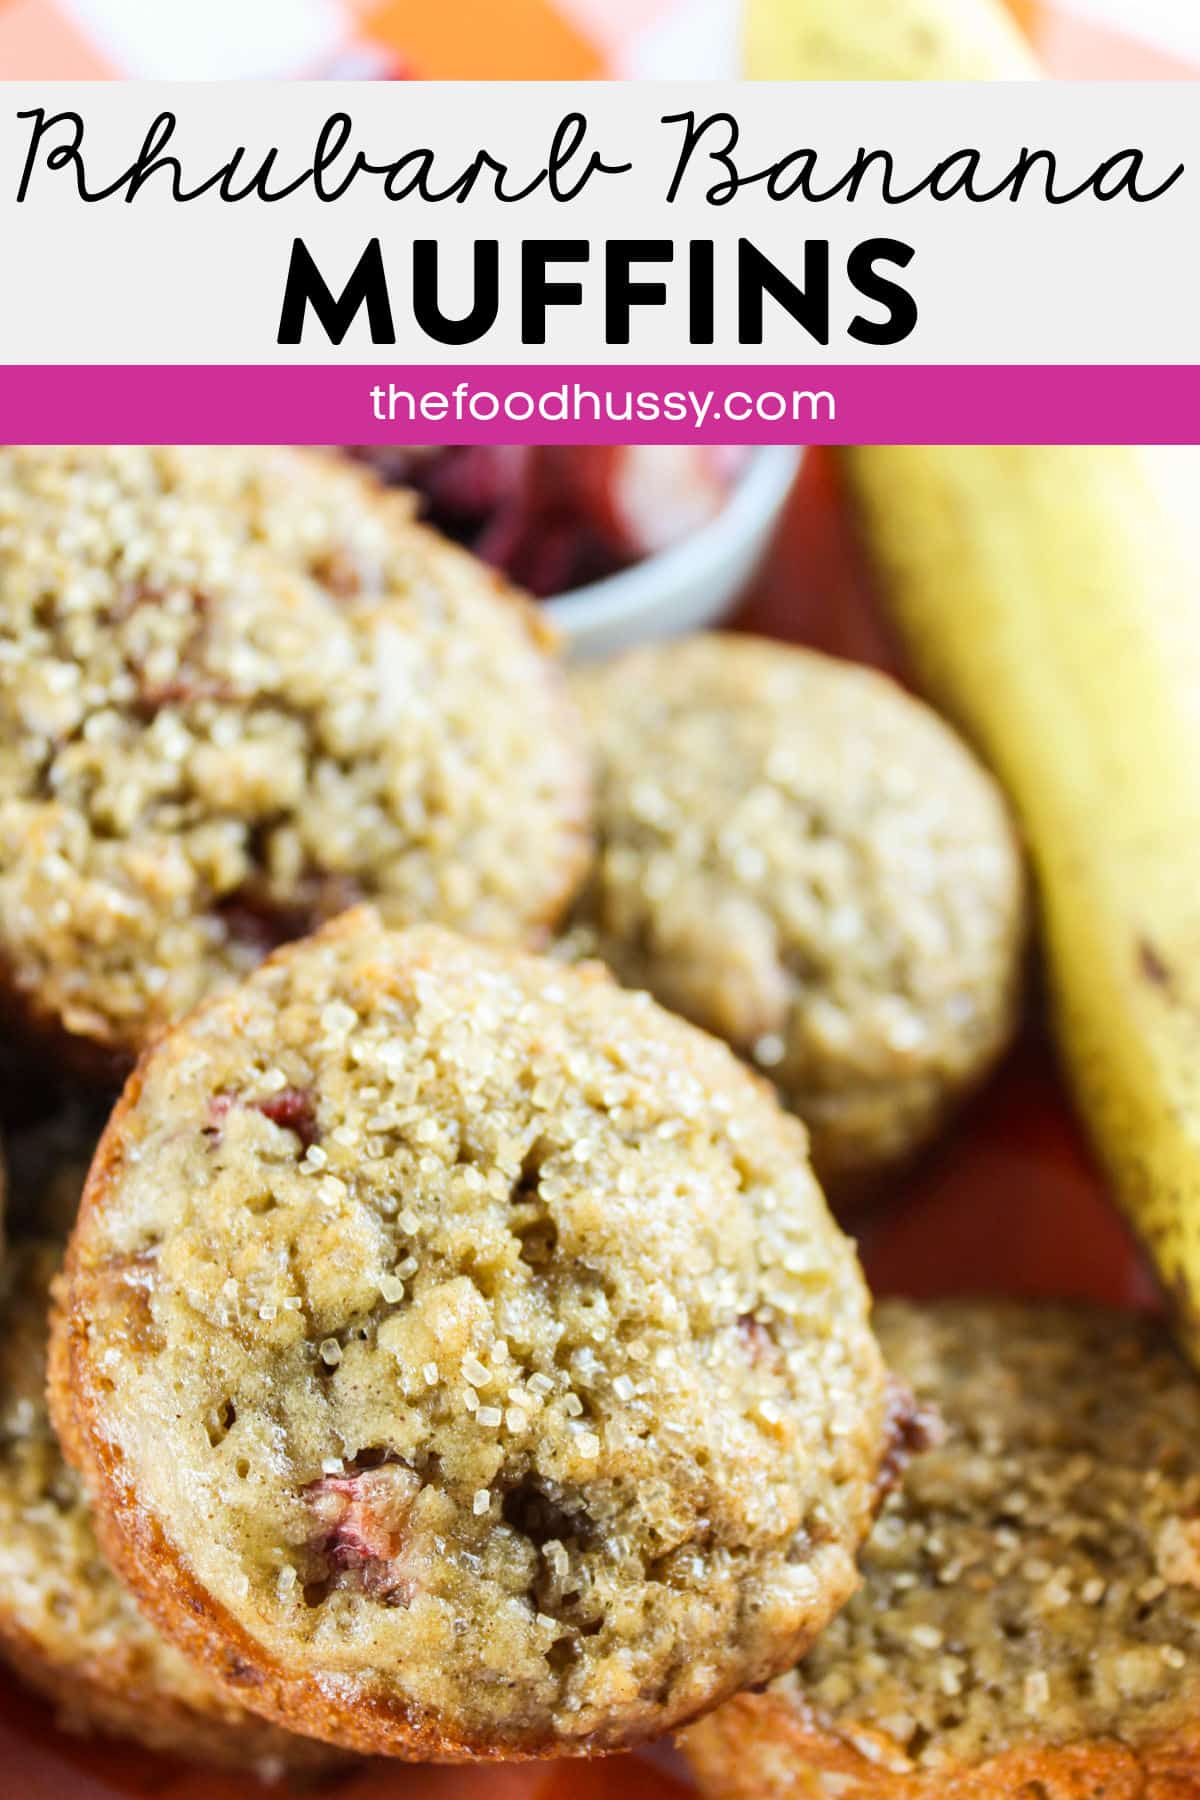 These Rhubarb Banana Muffins are delicious for breakfast, brunch or even a snack! Rhubarb is one of my favorite spring fruits and it's so bountiful! This is a great way to use up quite a bit and have yummy treats! via @foodhussy